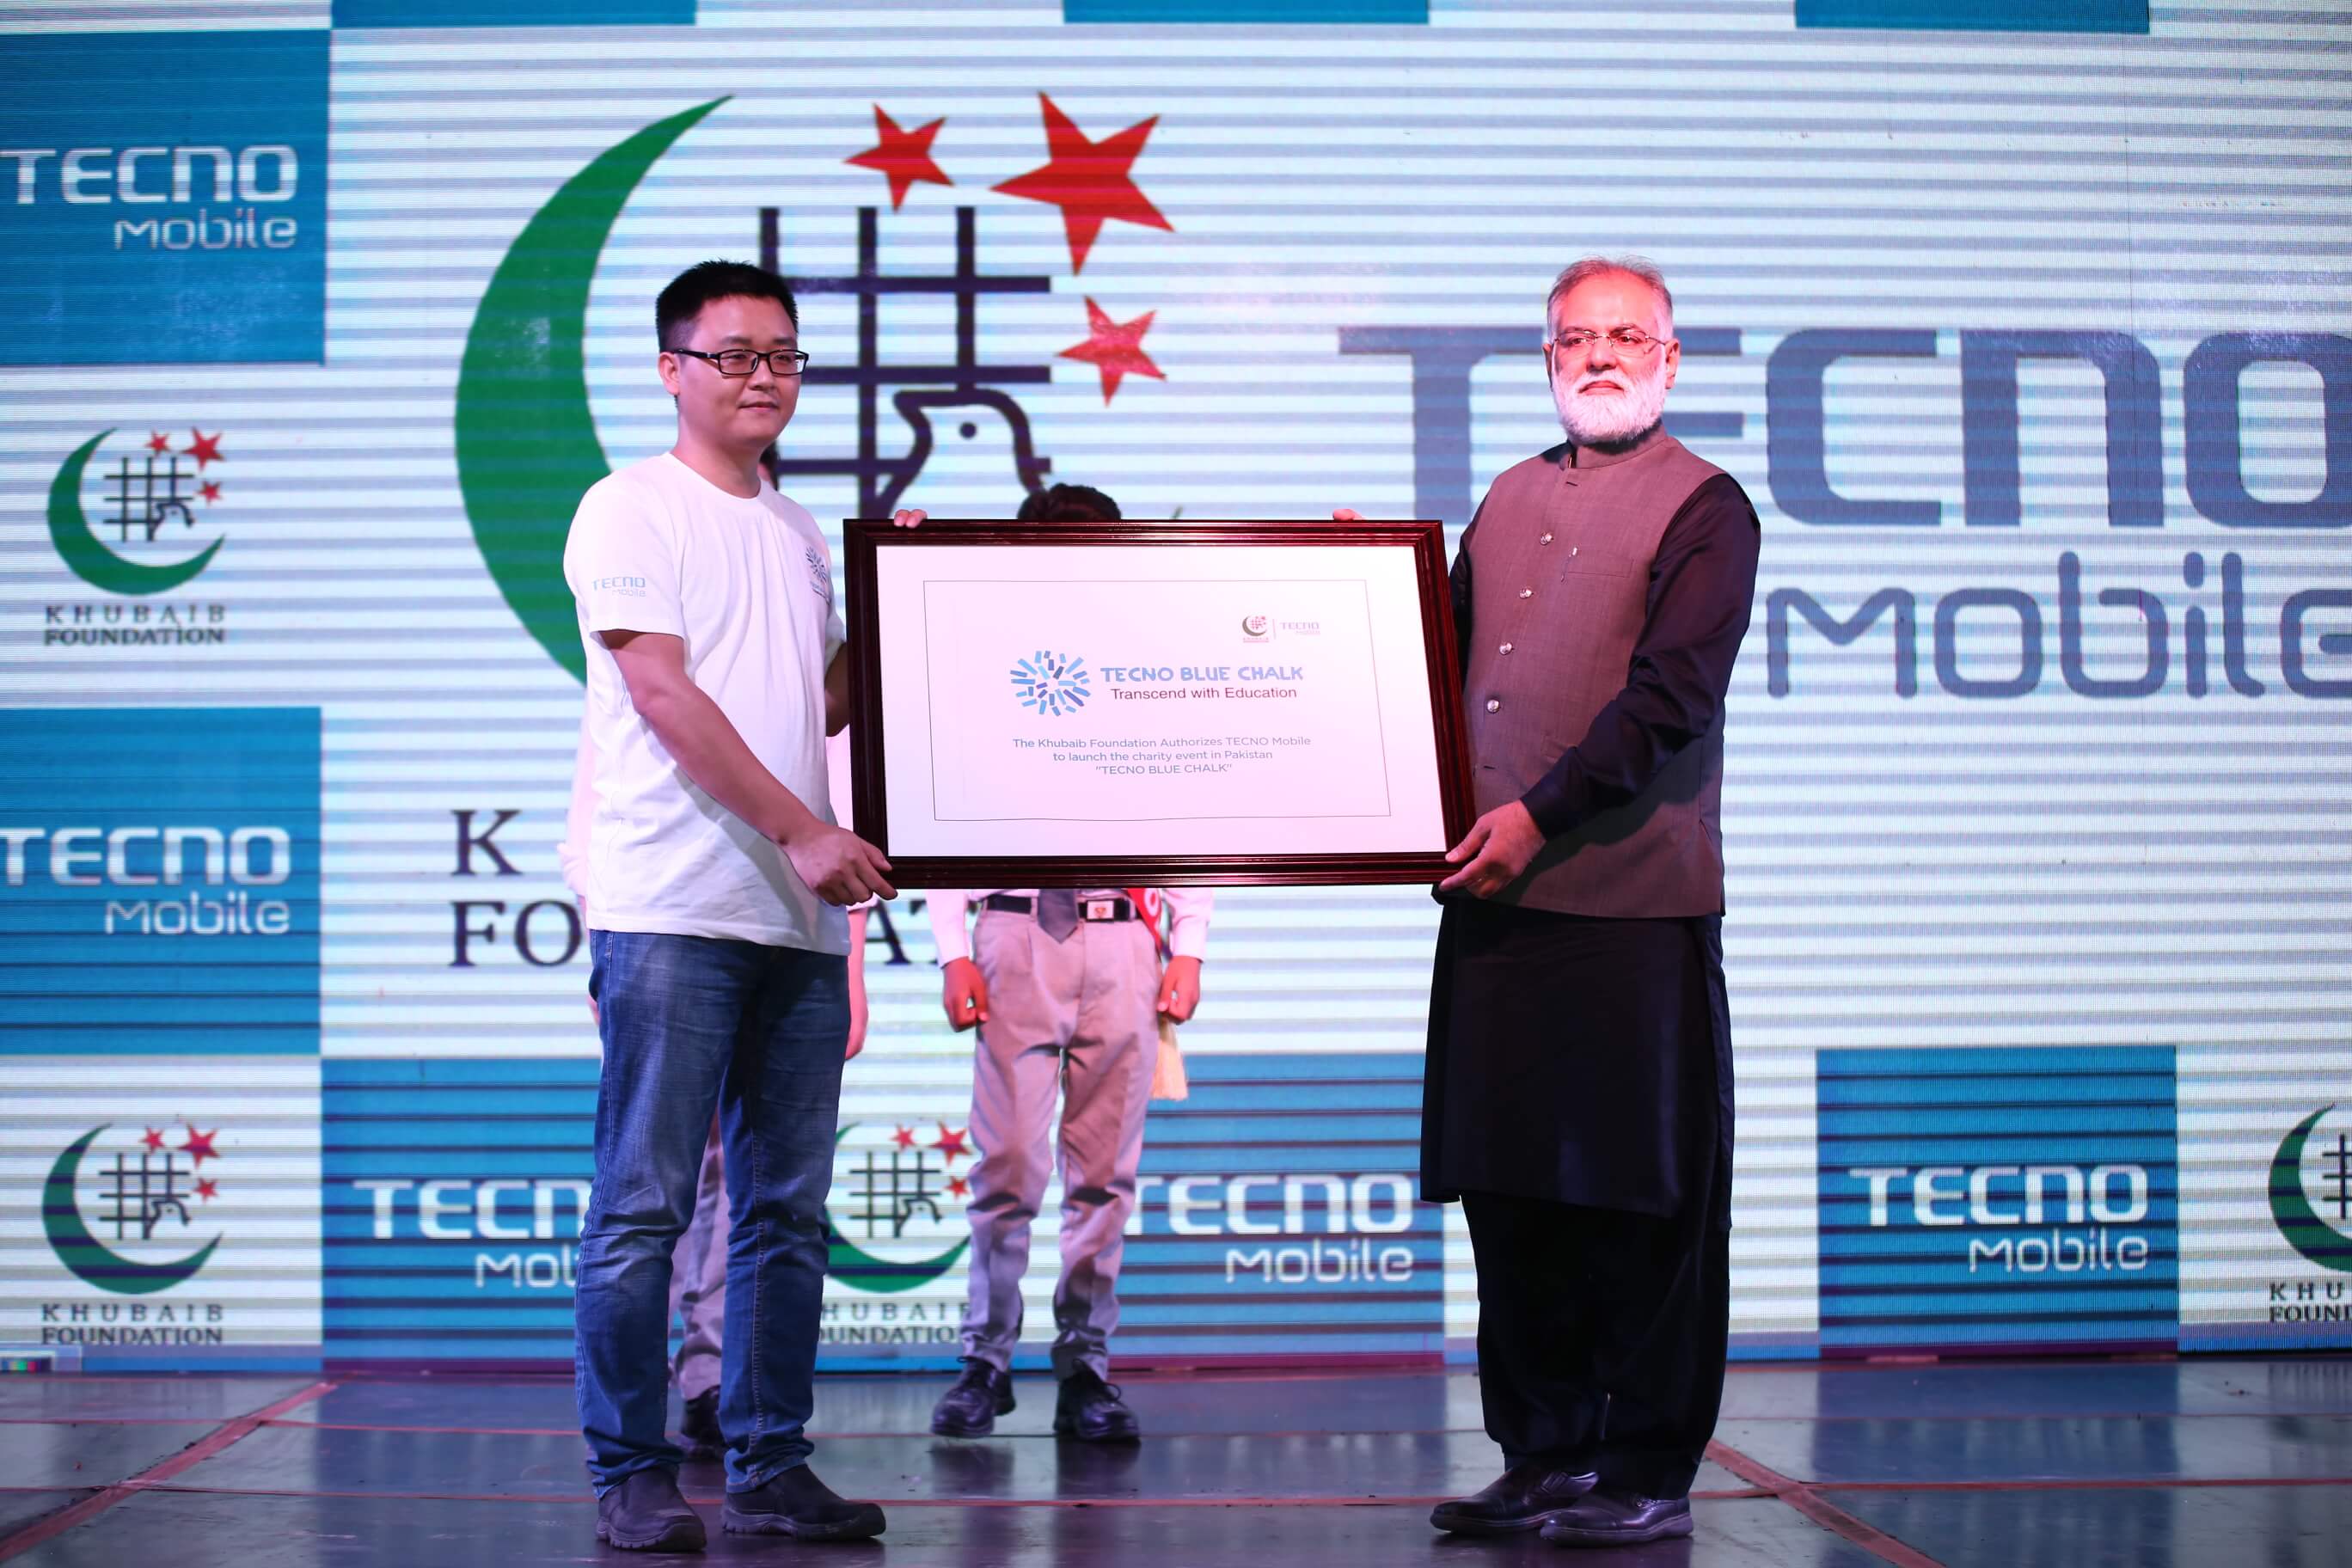 TECNO PAKISTAN SET AN EXAMPLE BY JOINING THE NOBLE CAUSE LED BY KHUBAIB FOUNDATION TO DELIVER QUALITY EDUCATION TO ORPHANS